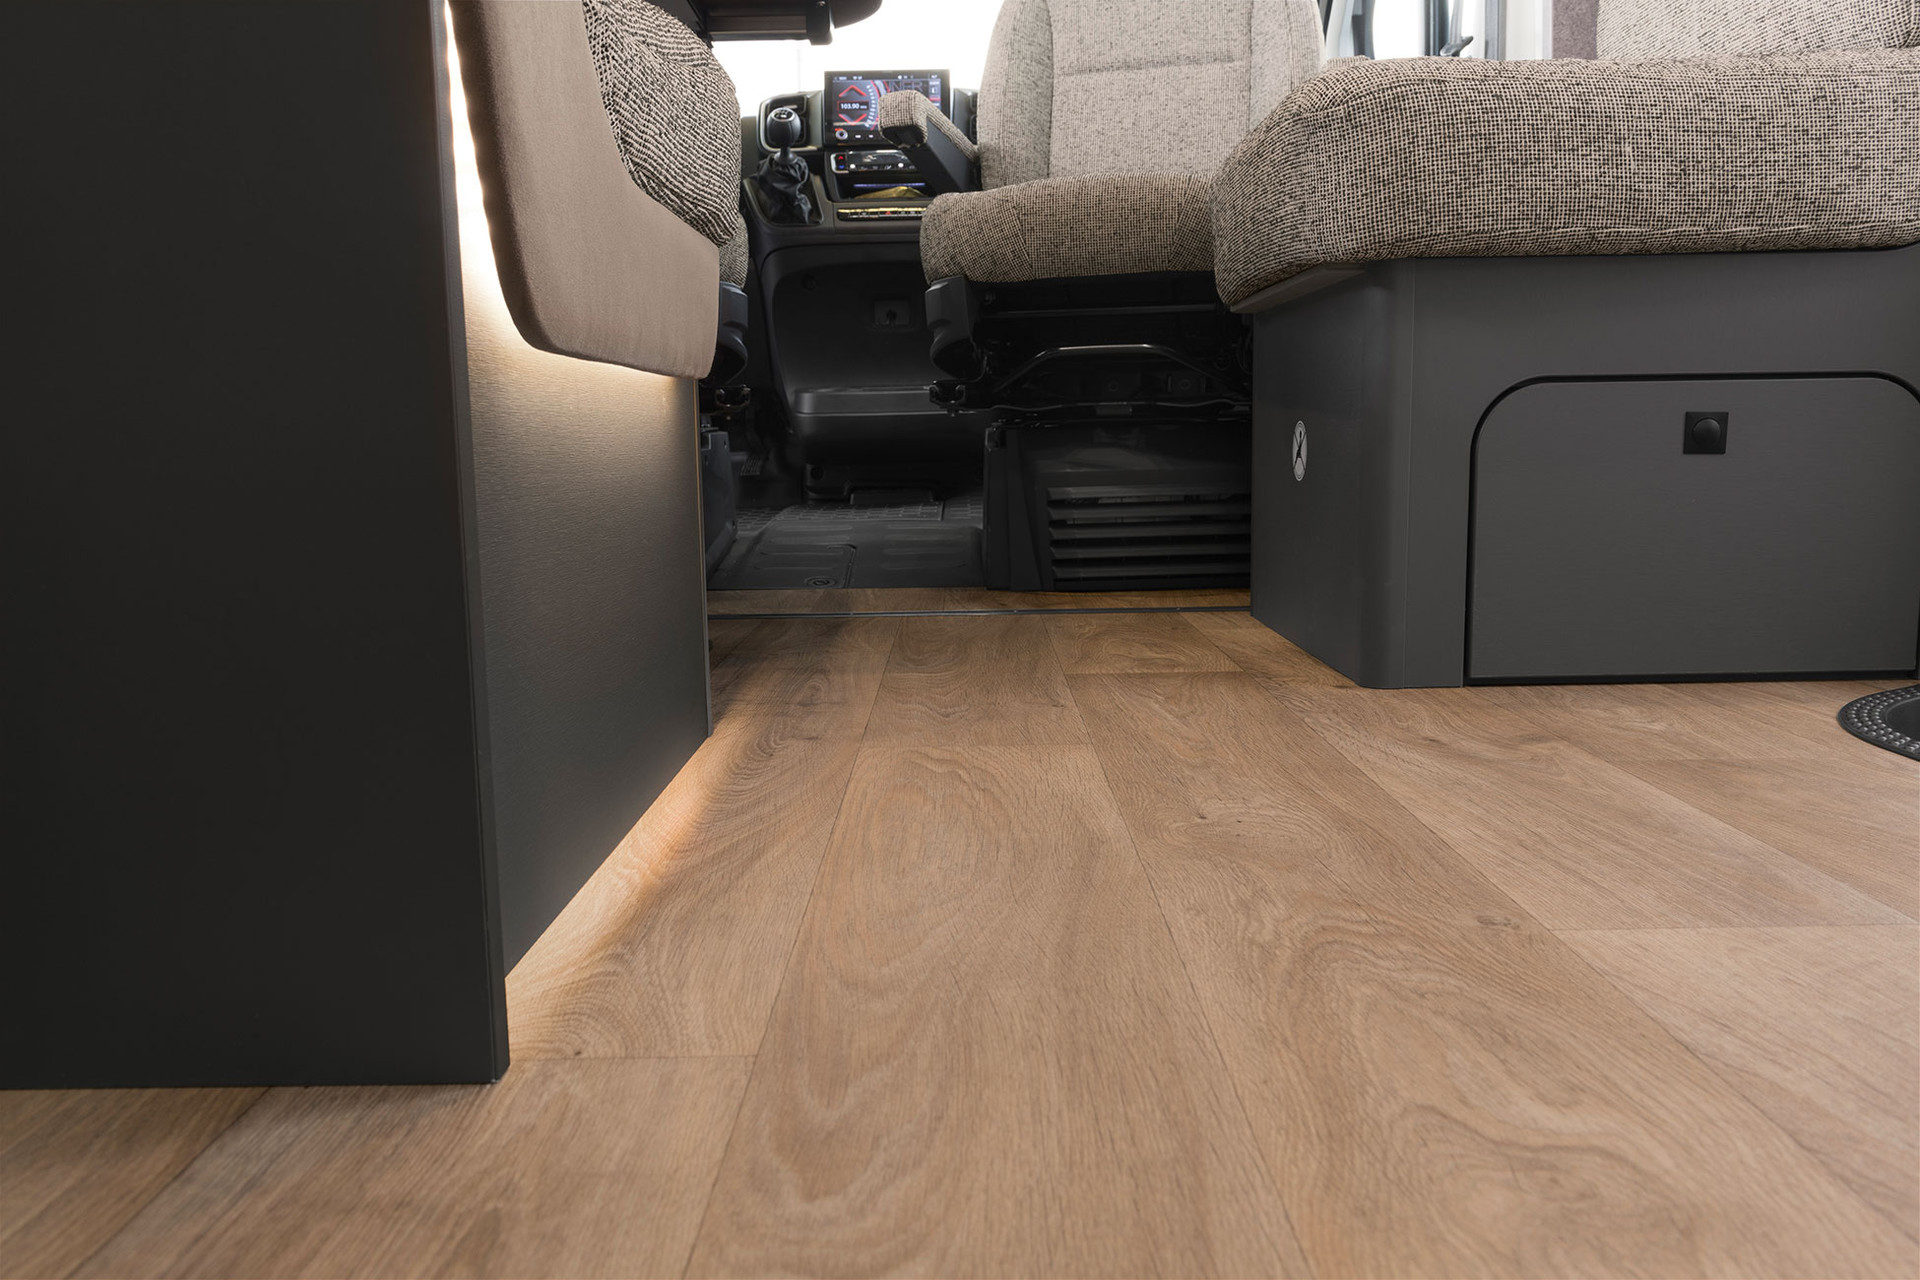 The IsoProtect living area floor is completely free from steps or ledges – from the driver’s cab to the bathroom.